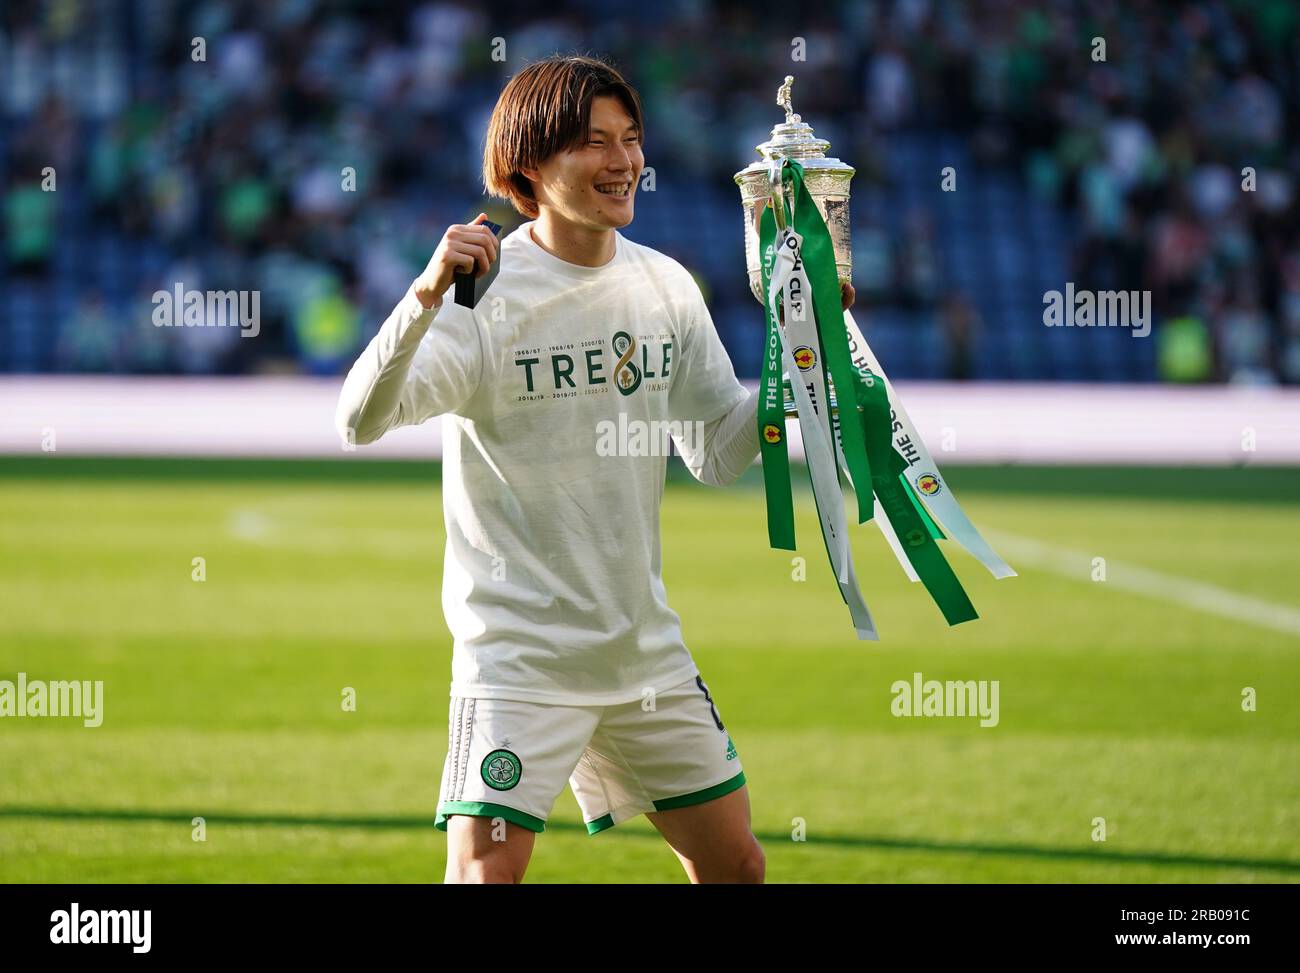 Never noticed that': Some Celtic fans react to 9-second footage of Kyogo  Furuhashi